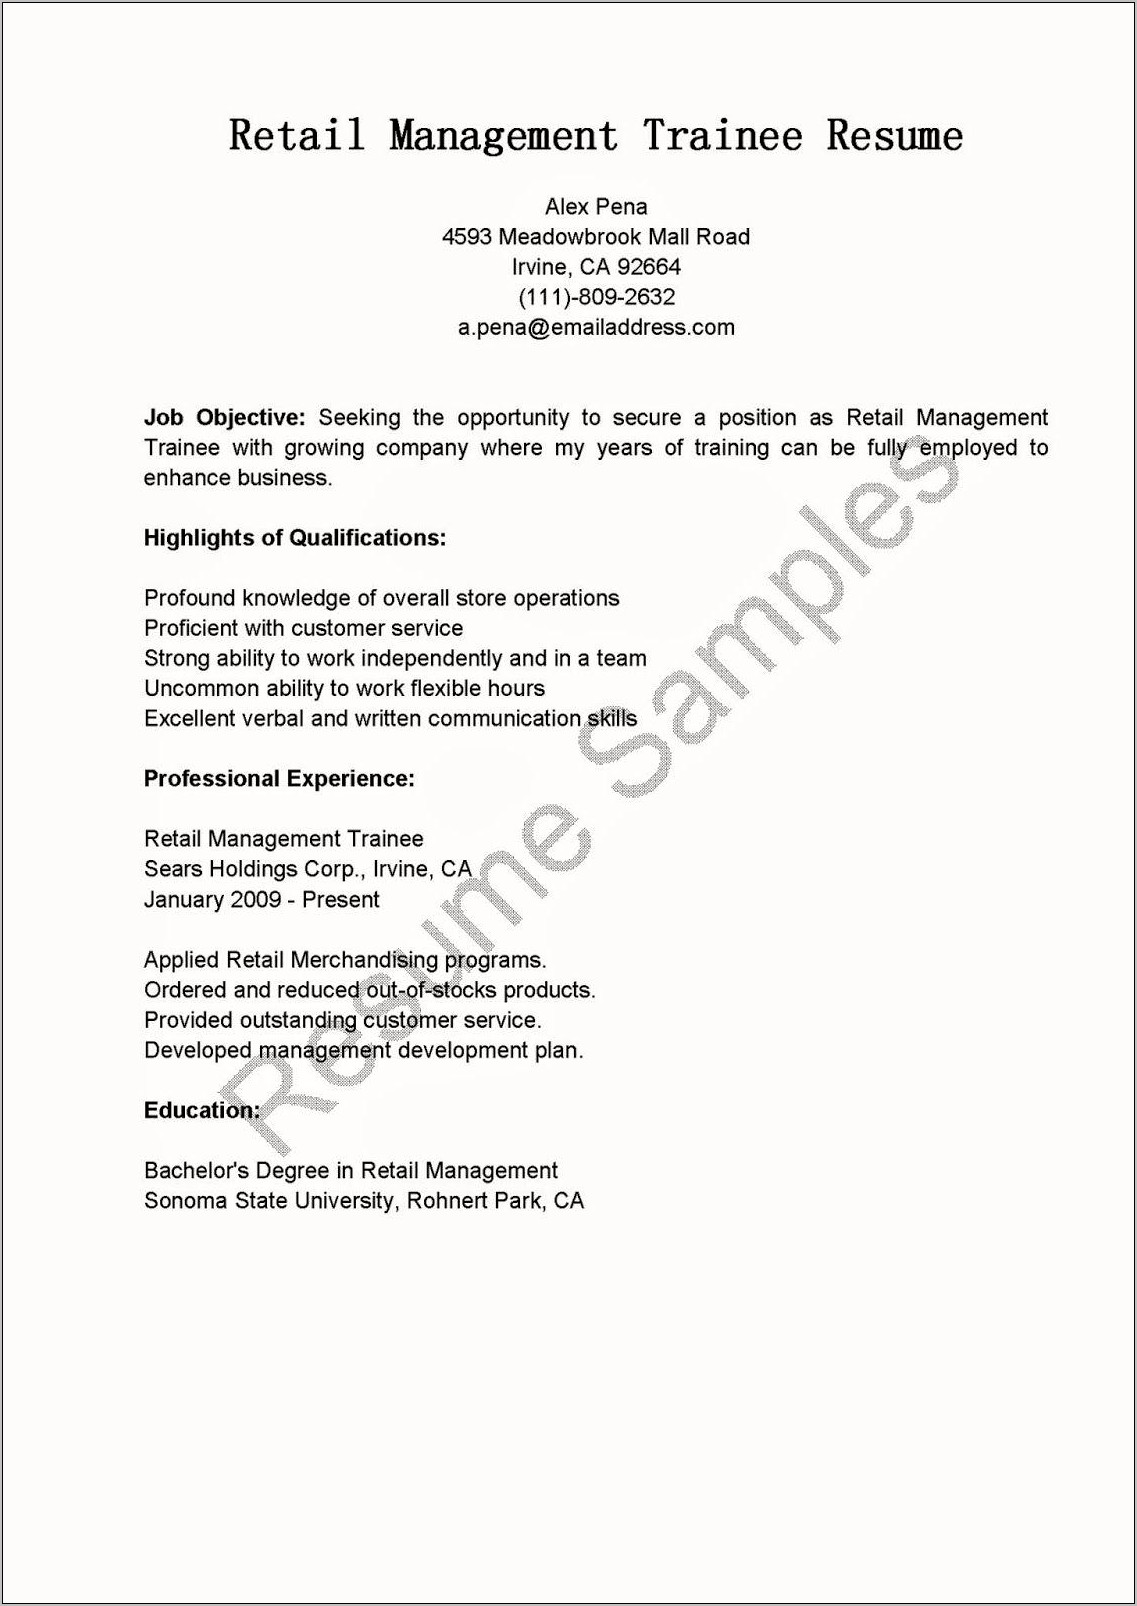 Resume For Retail Management Position